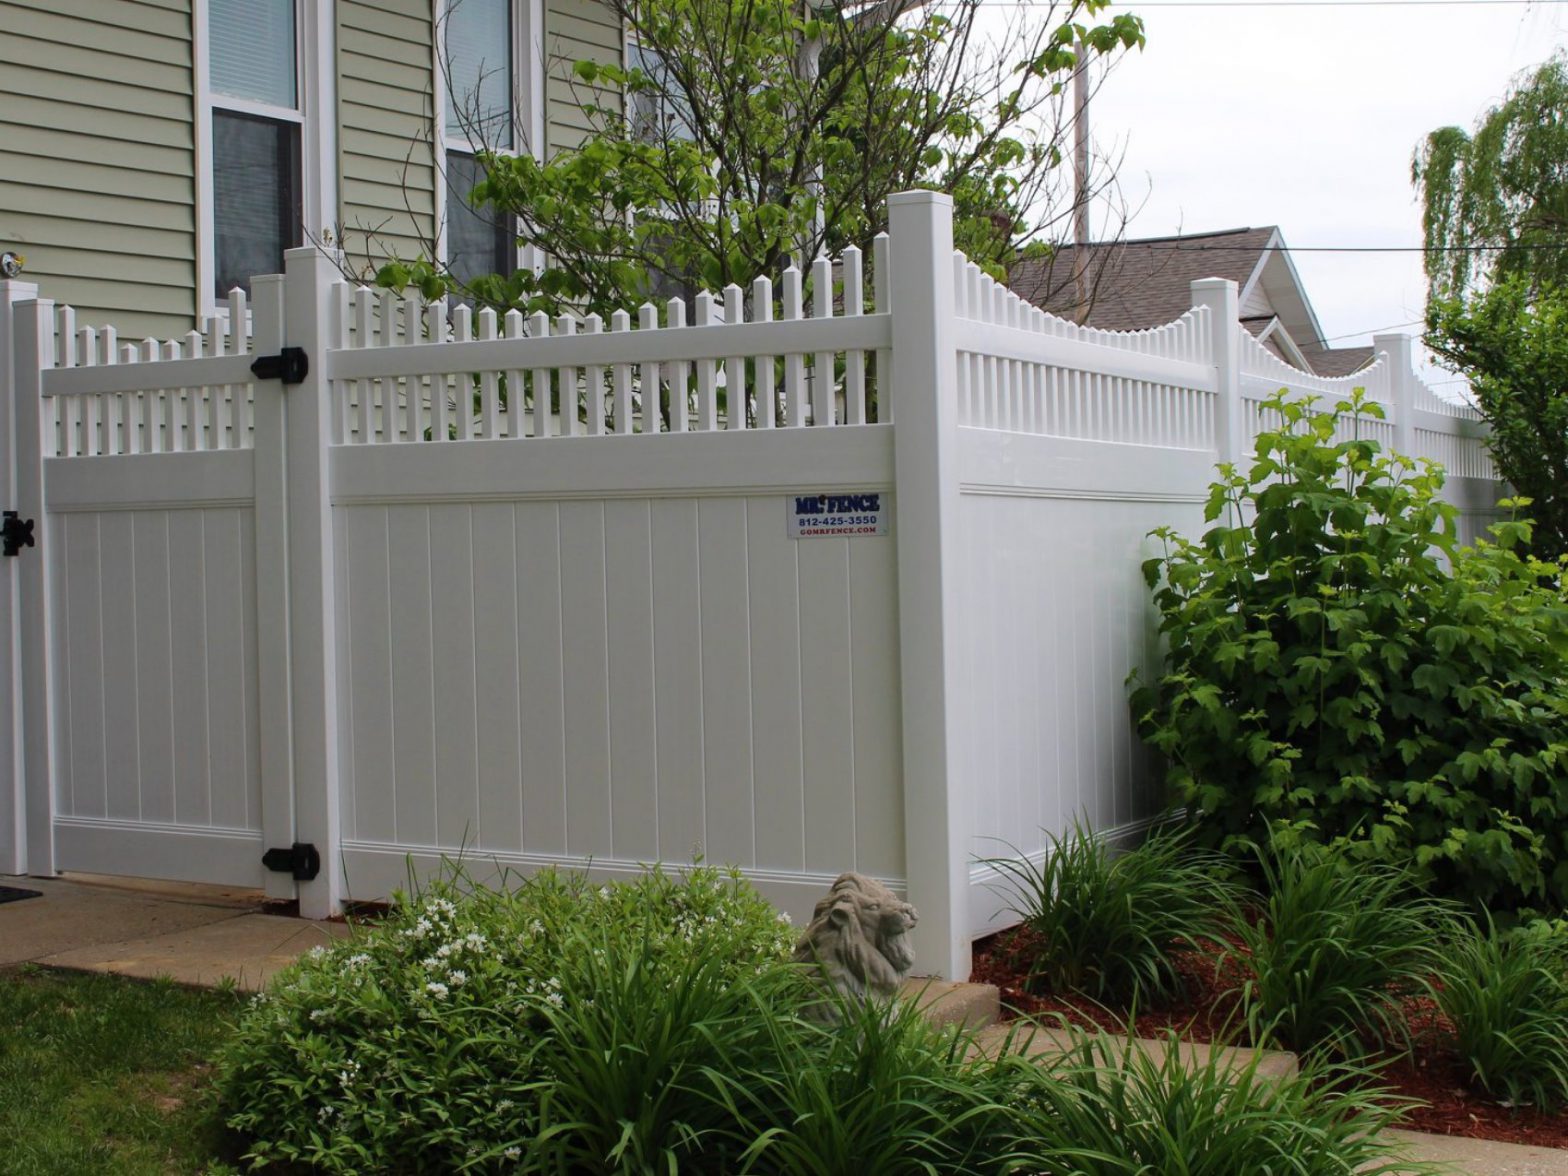 More Reasons For Vinyl Privacy Fences in Indiana